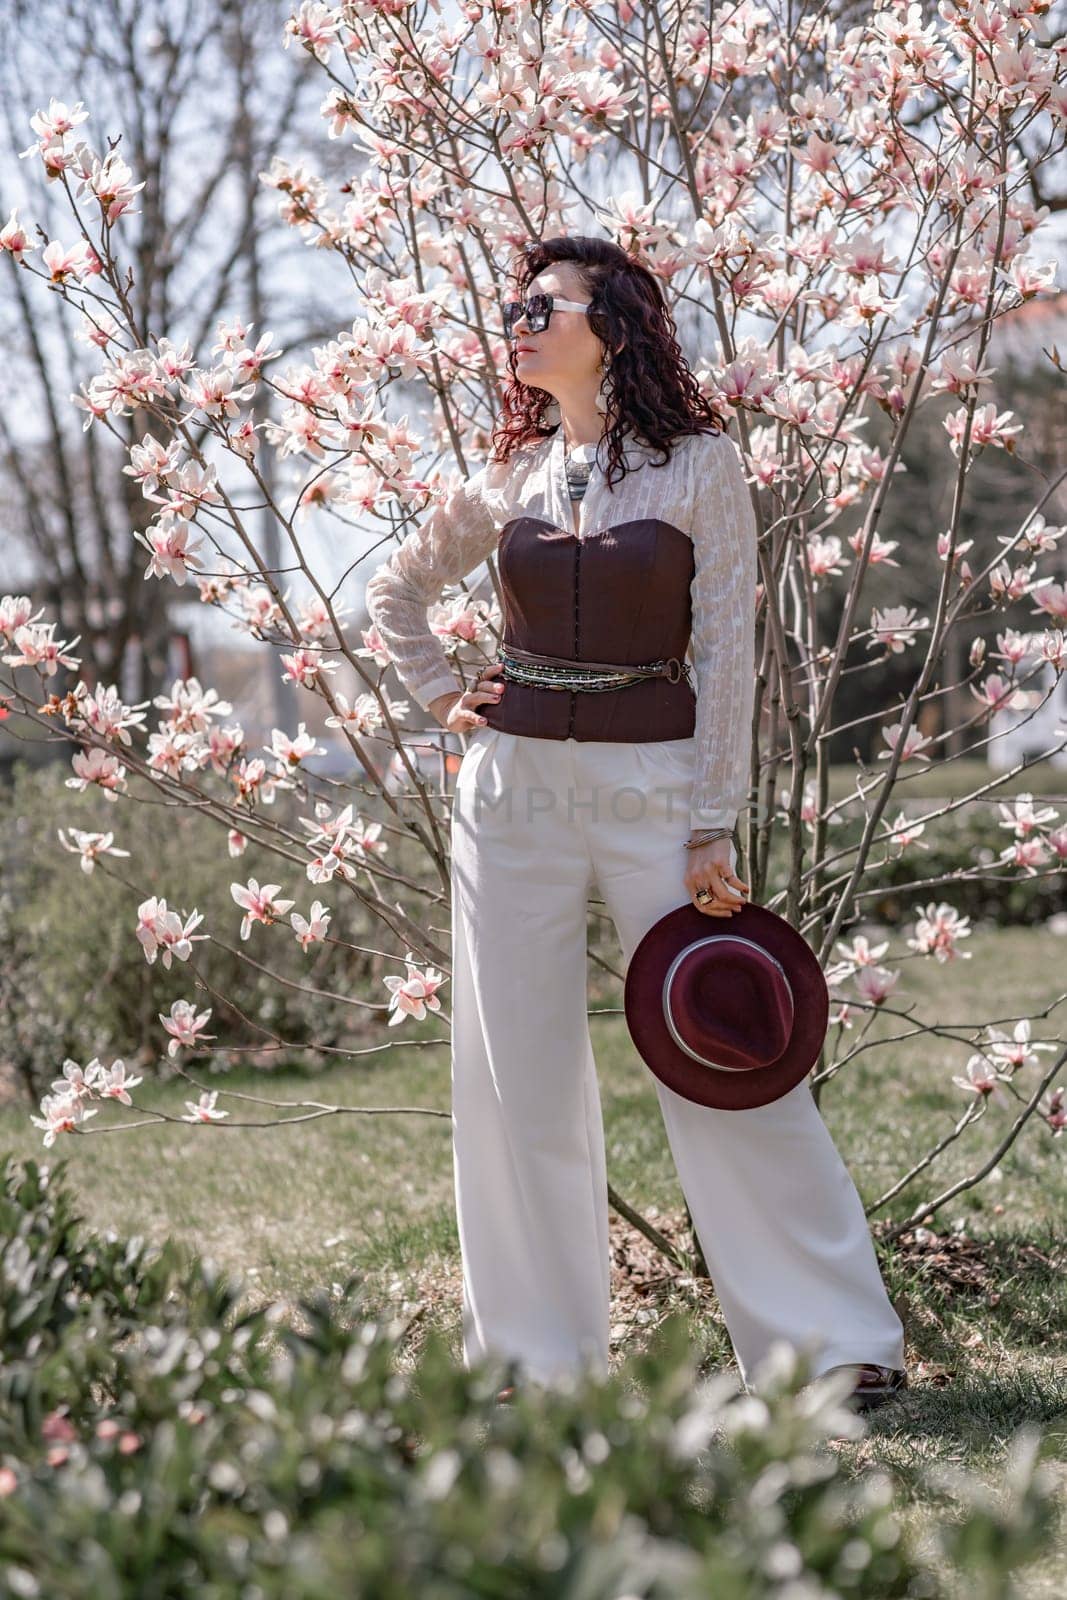 Magnolia park woman. Stylish woman in a hat stands near the magnolia bush in the park. Dressed in white corset pants and posing for the camera